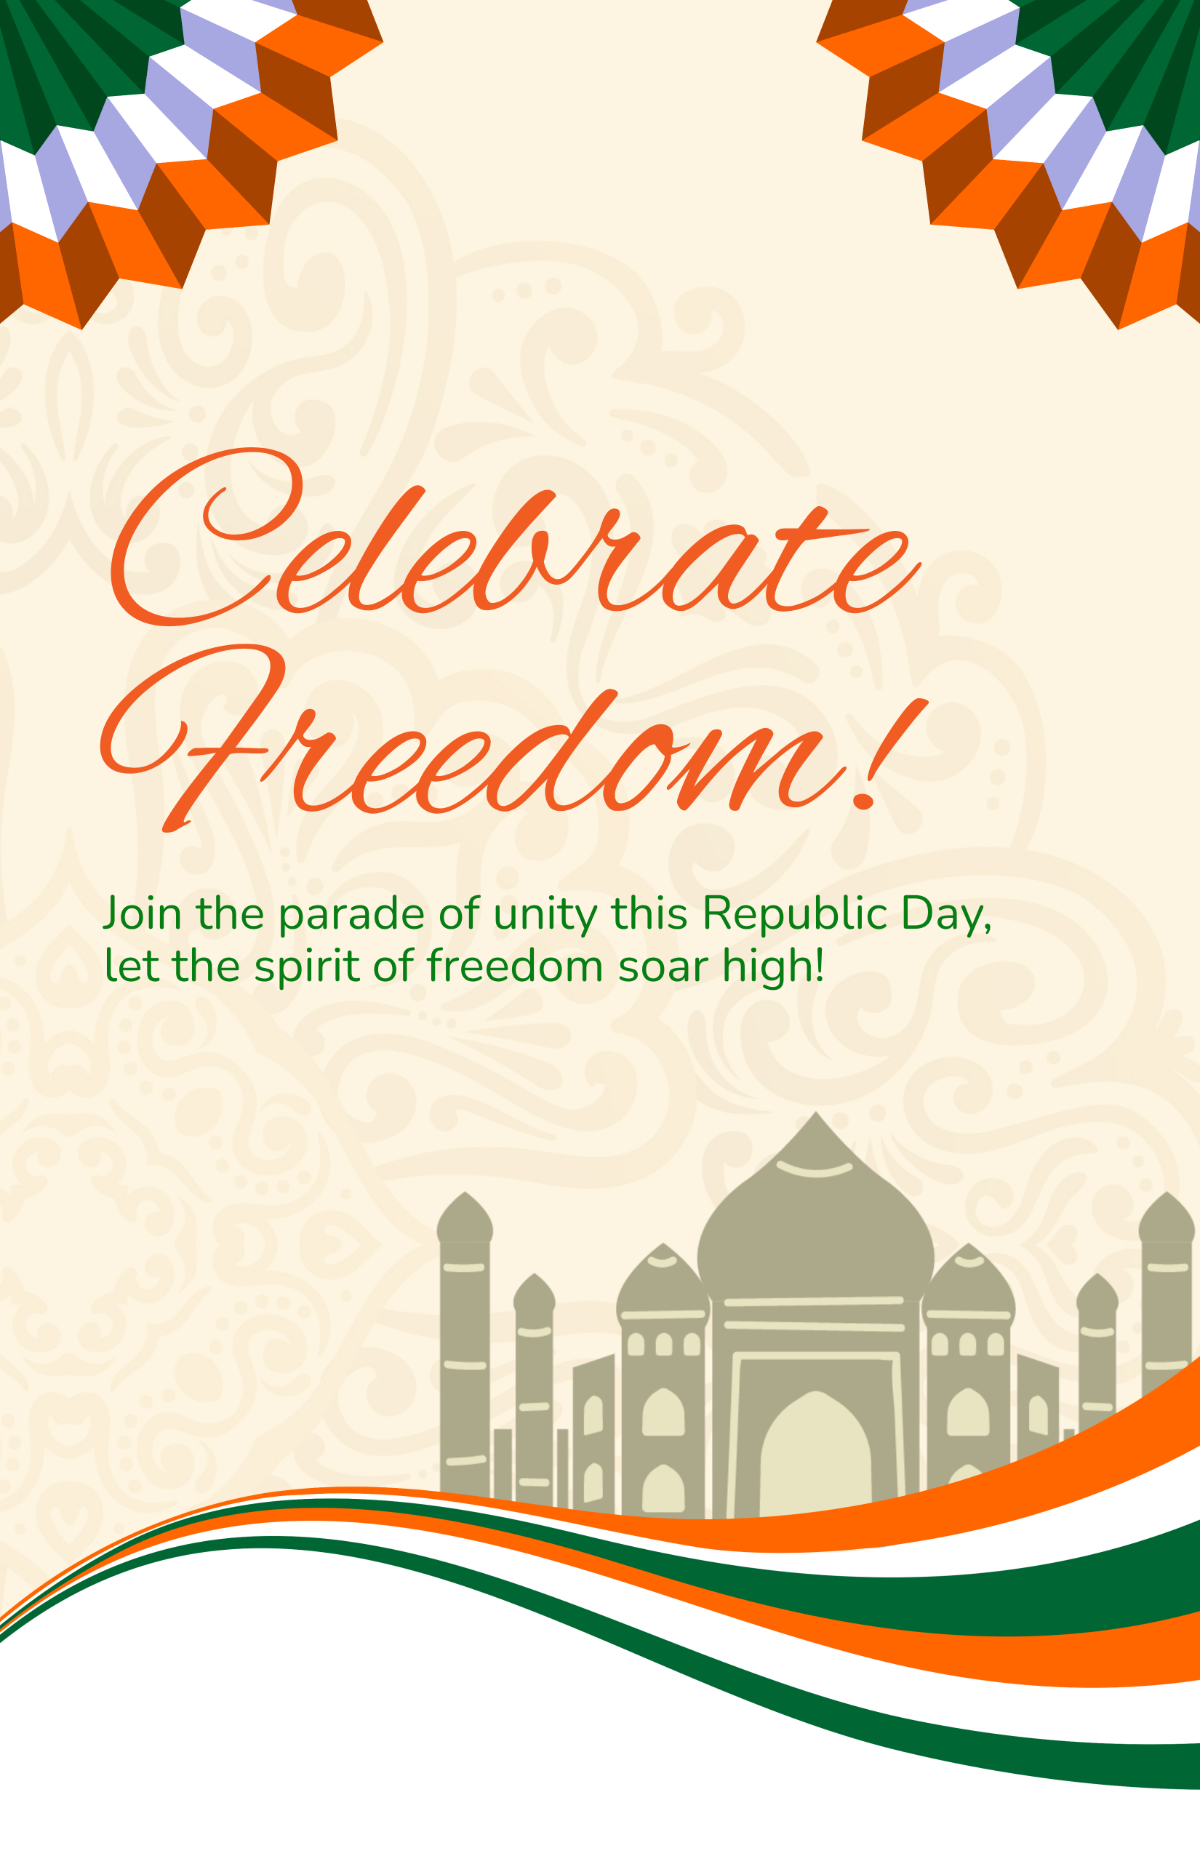 Republic Day Parade Poster Template